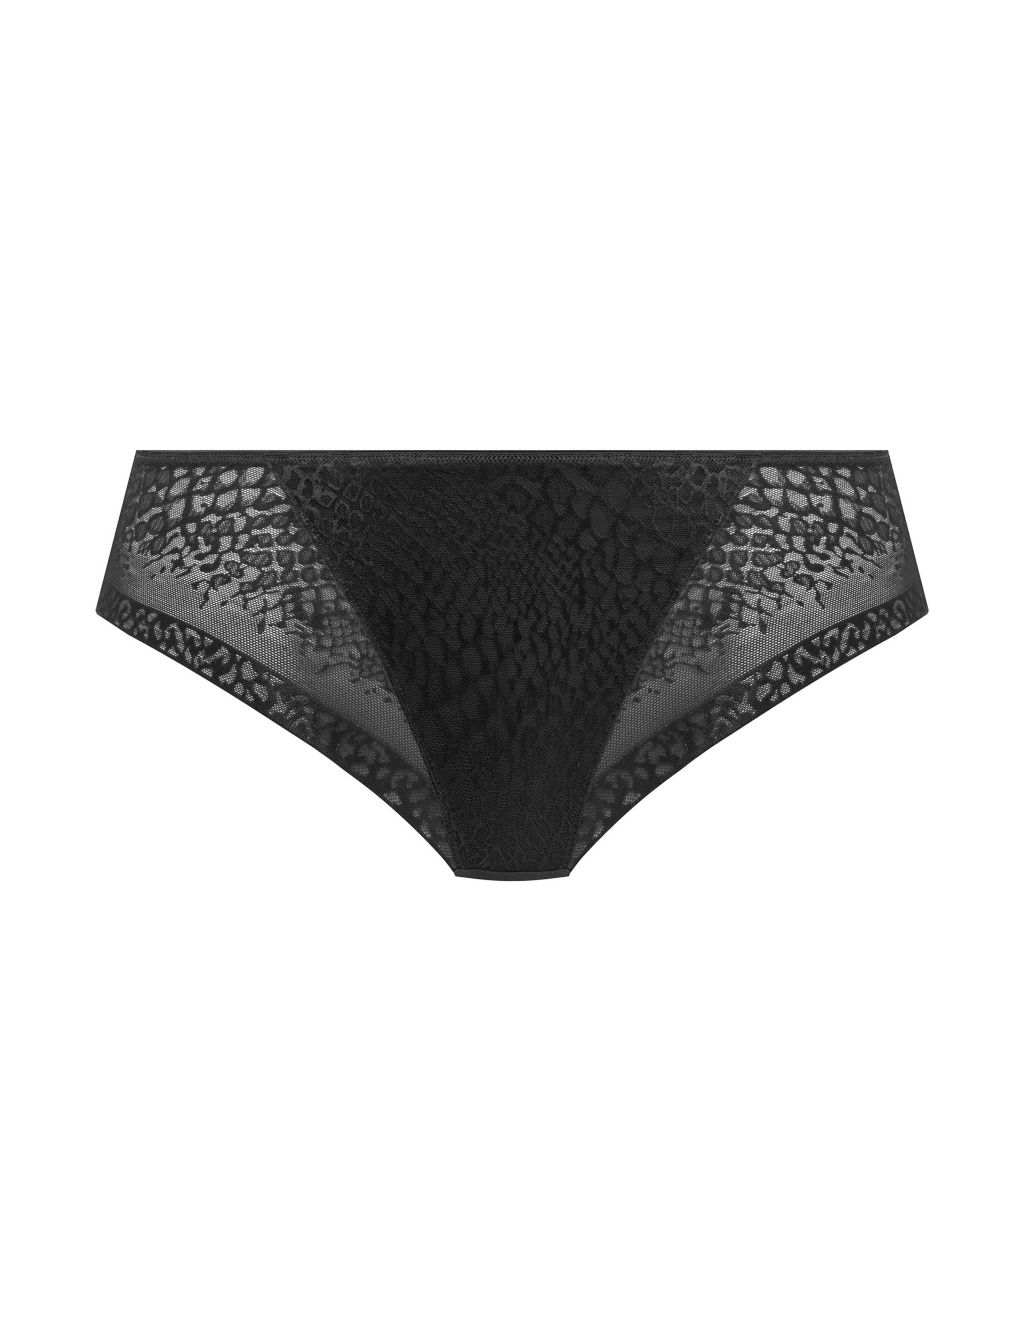 Envisage Jacquard Lace Knickers 1 of 6